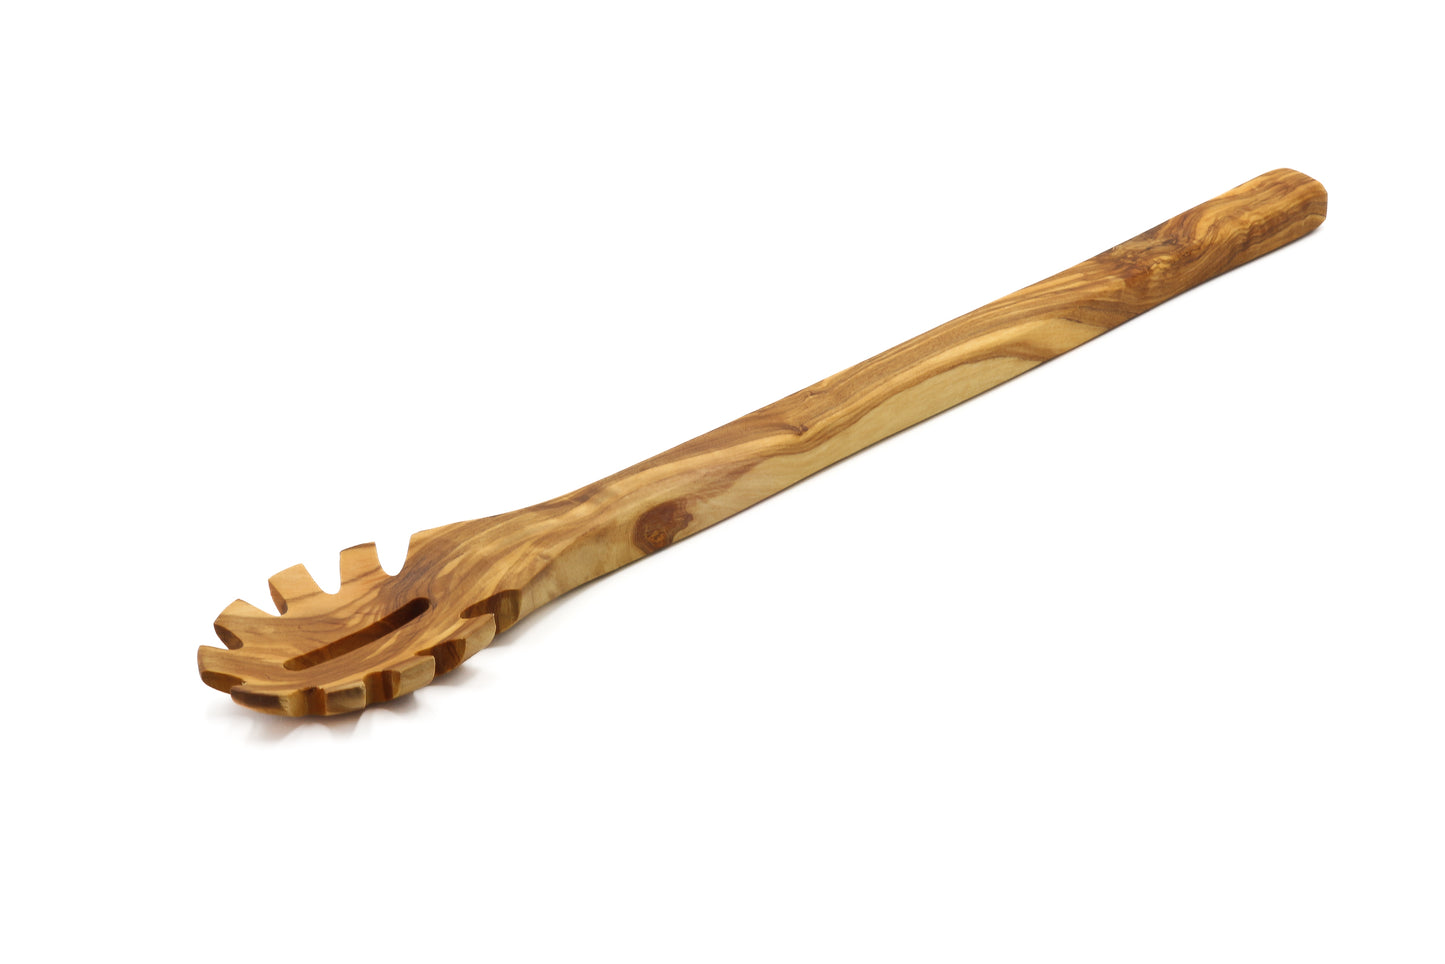 Olive wood pasta and noodle scoop, perfect for twirling spaghetti